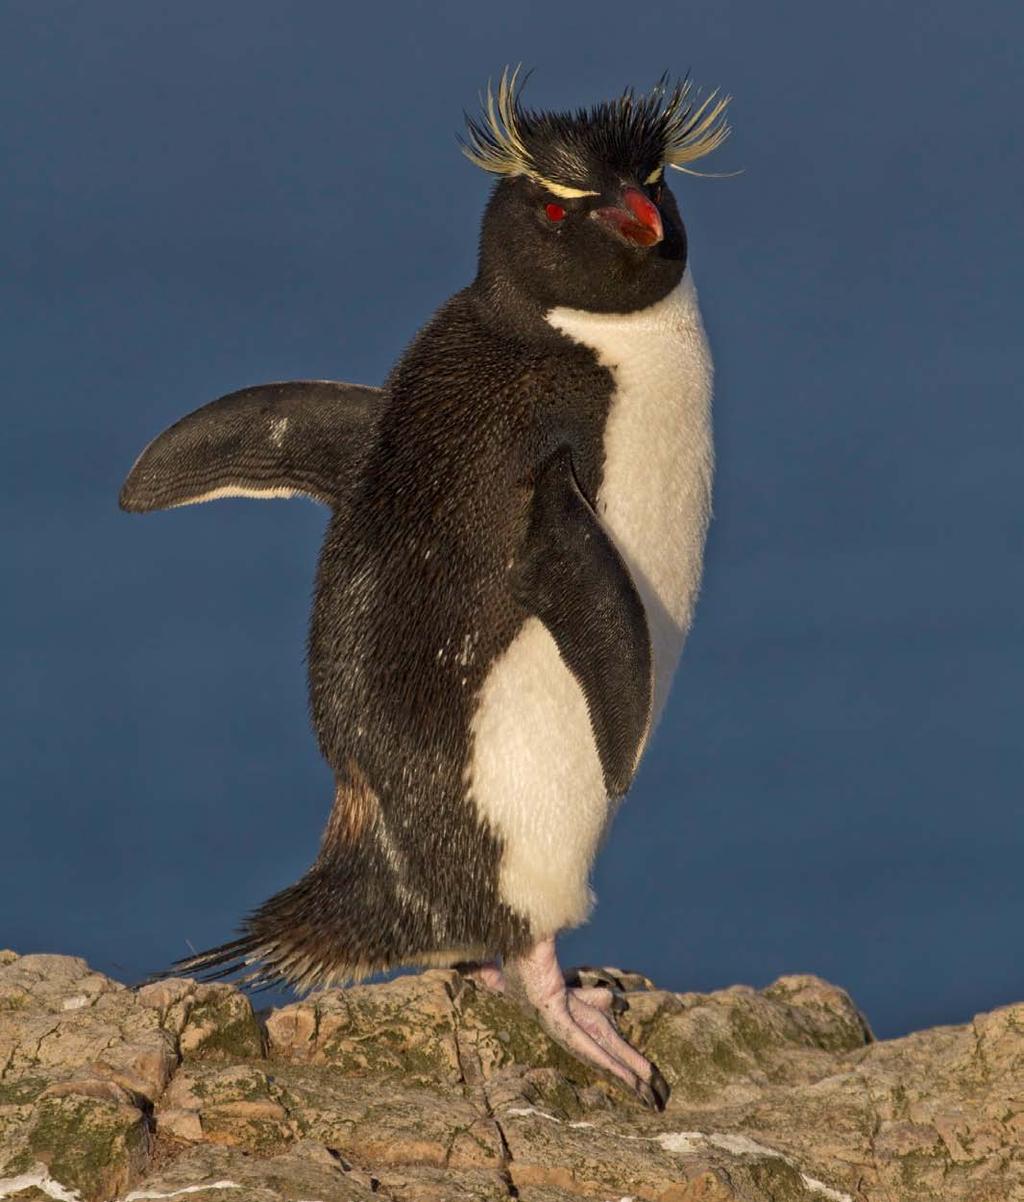 73 Eudyptes chrysocome The Southern Rockhopper Penguin group has a global population of roughly 1 million pairs.